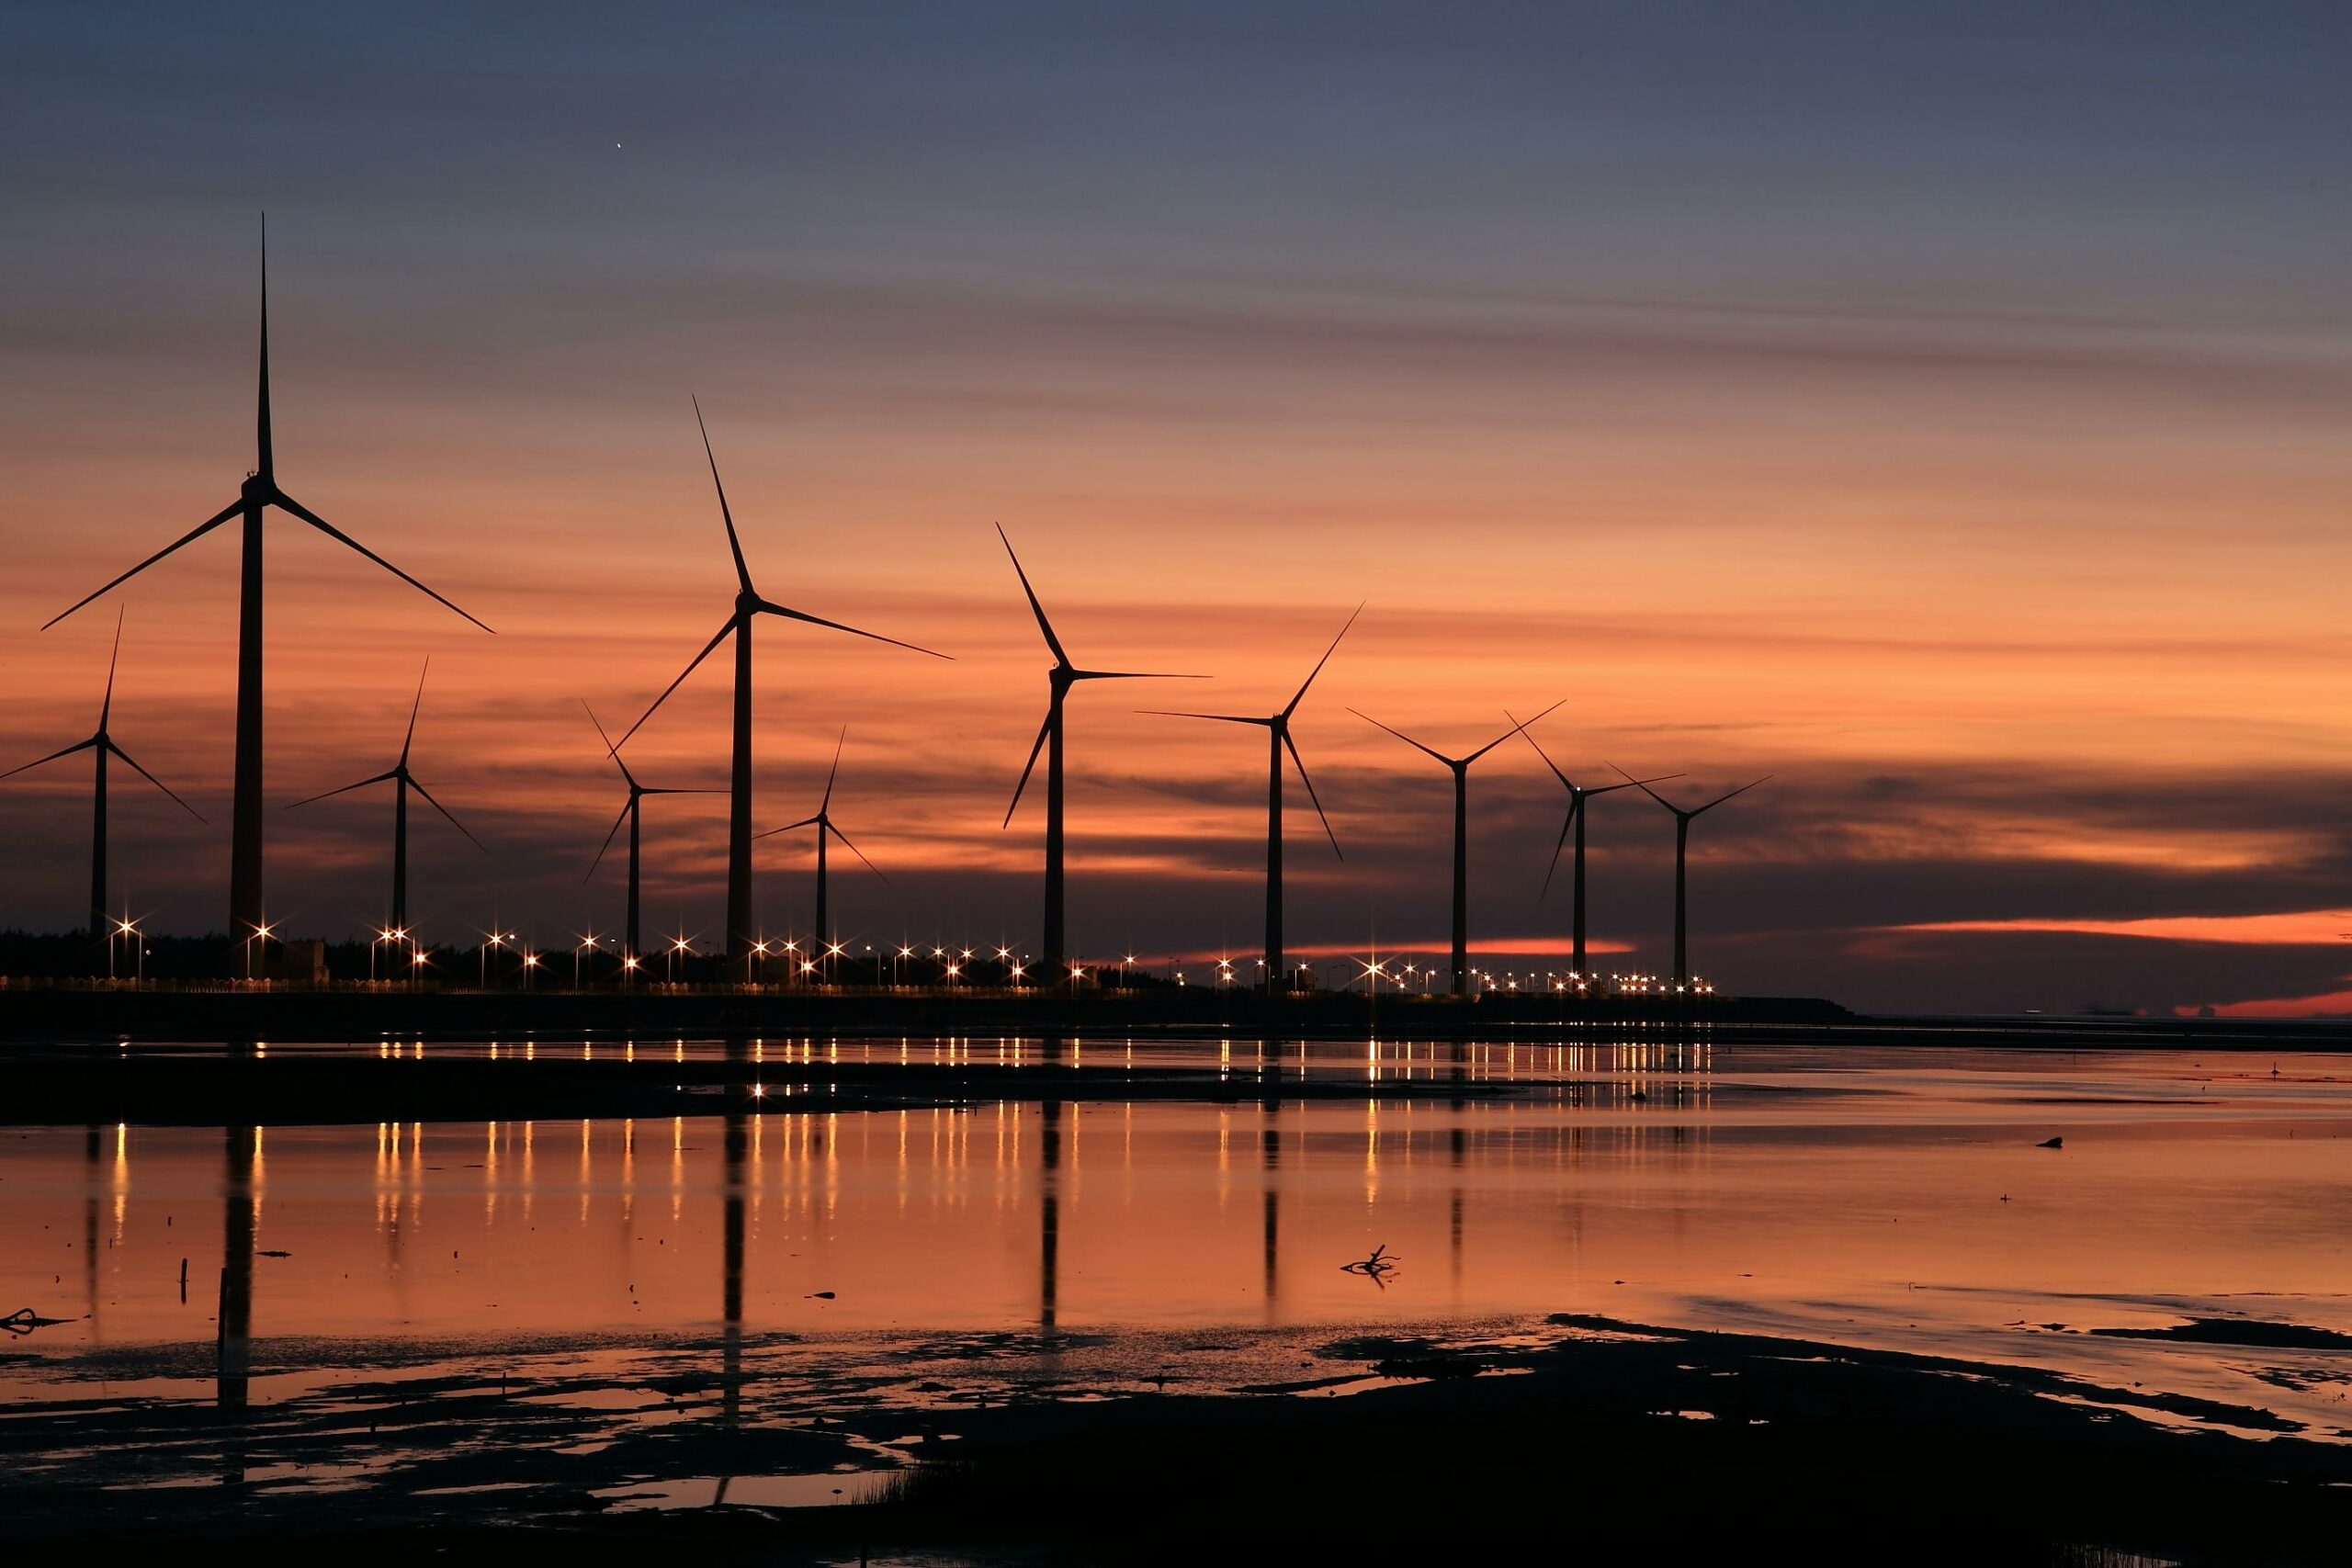 A bustling UK business district with wind turbines symbolising renewable energy investments